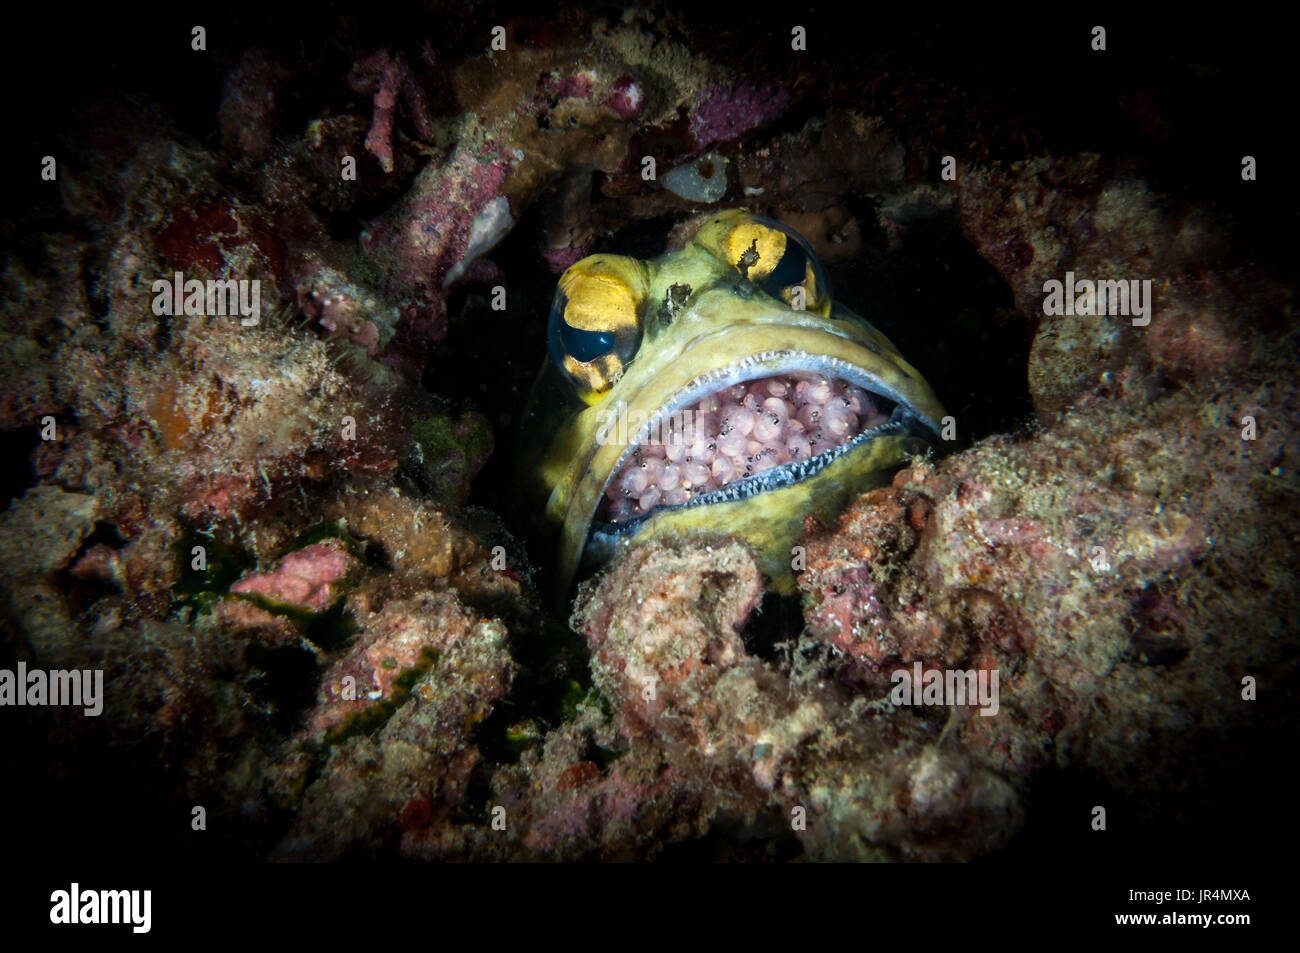 Dendritic jawfish (Opistognathus dendriticus) with eggs in its mouth, Lankayan Island, Malaysia Stock Photo